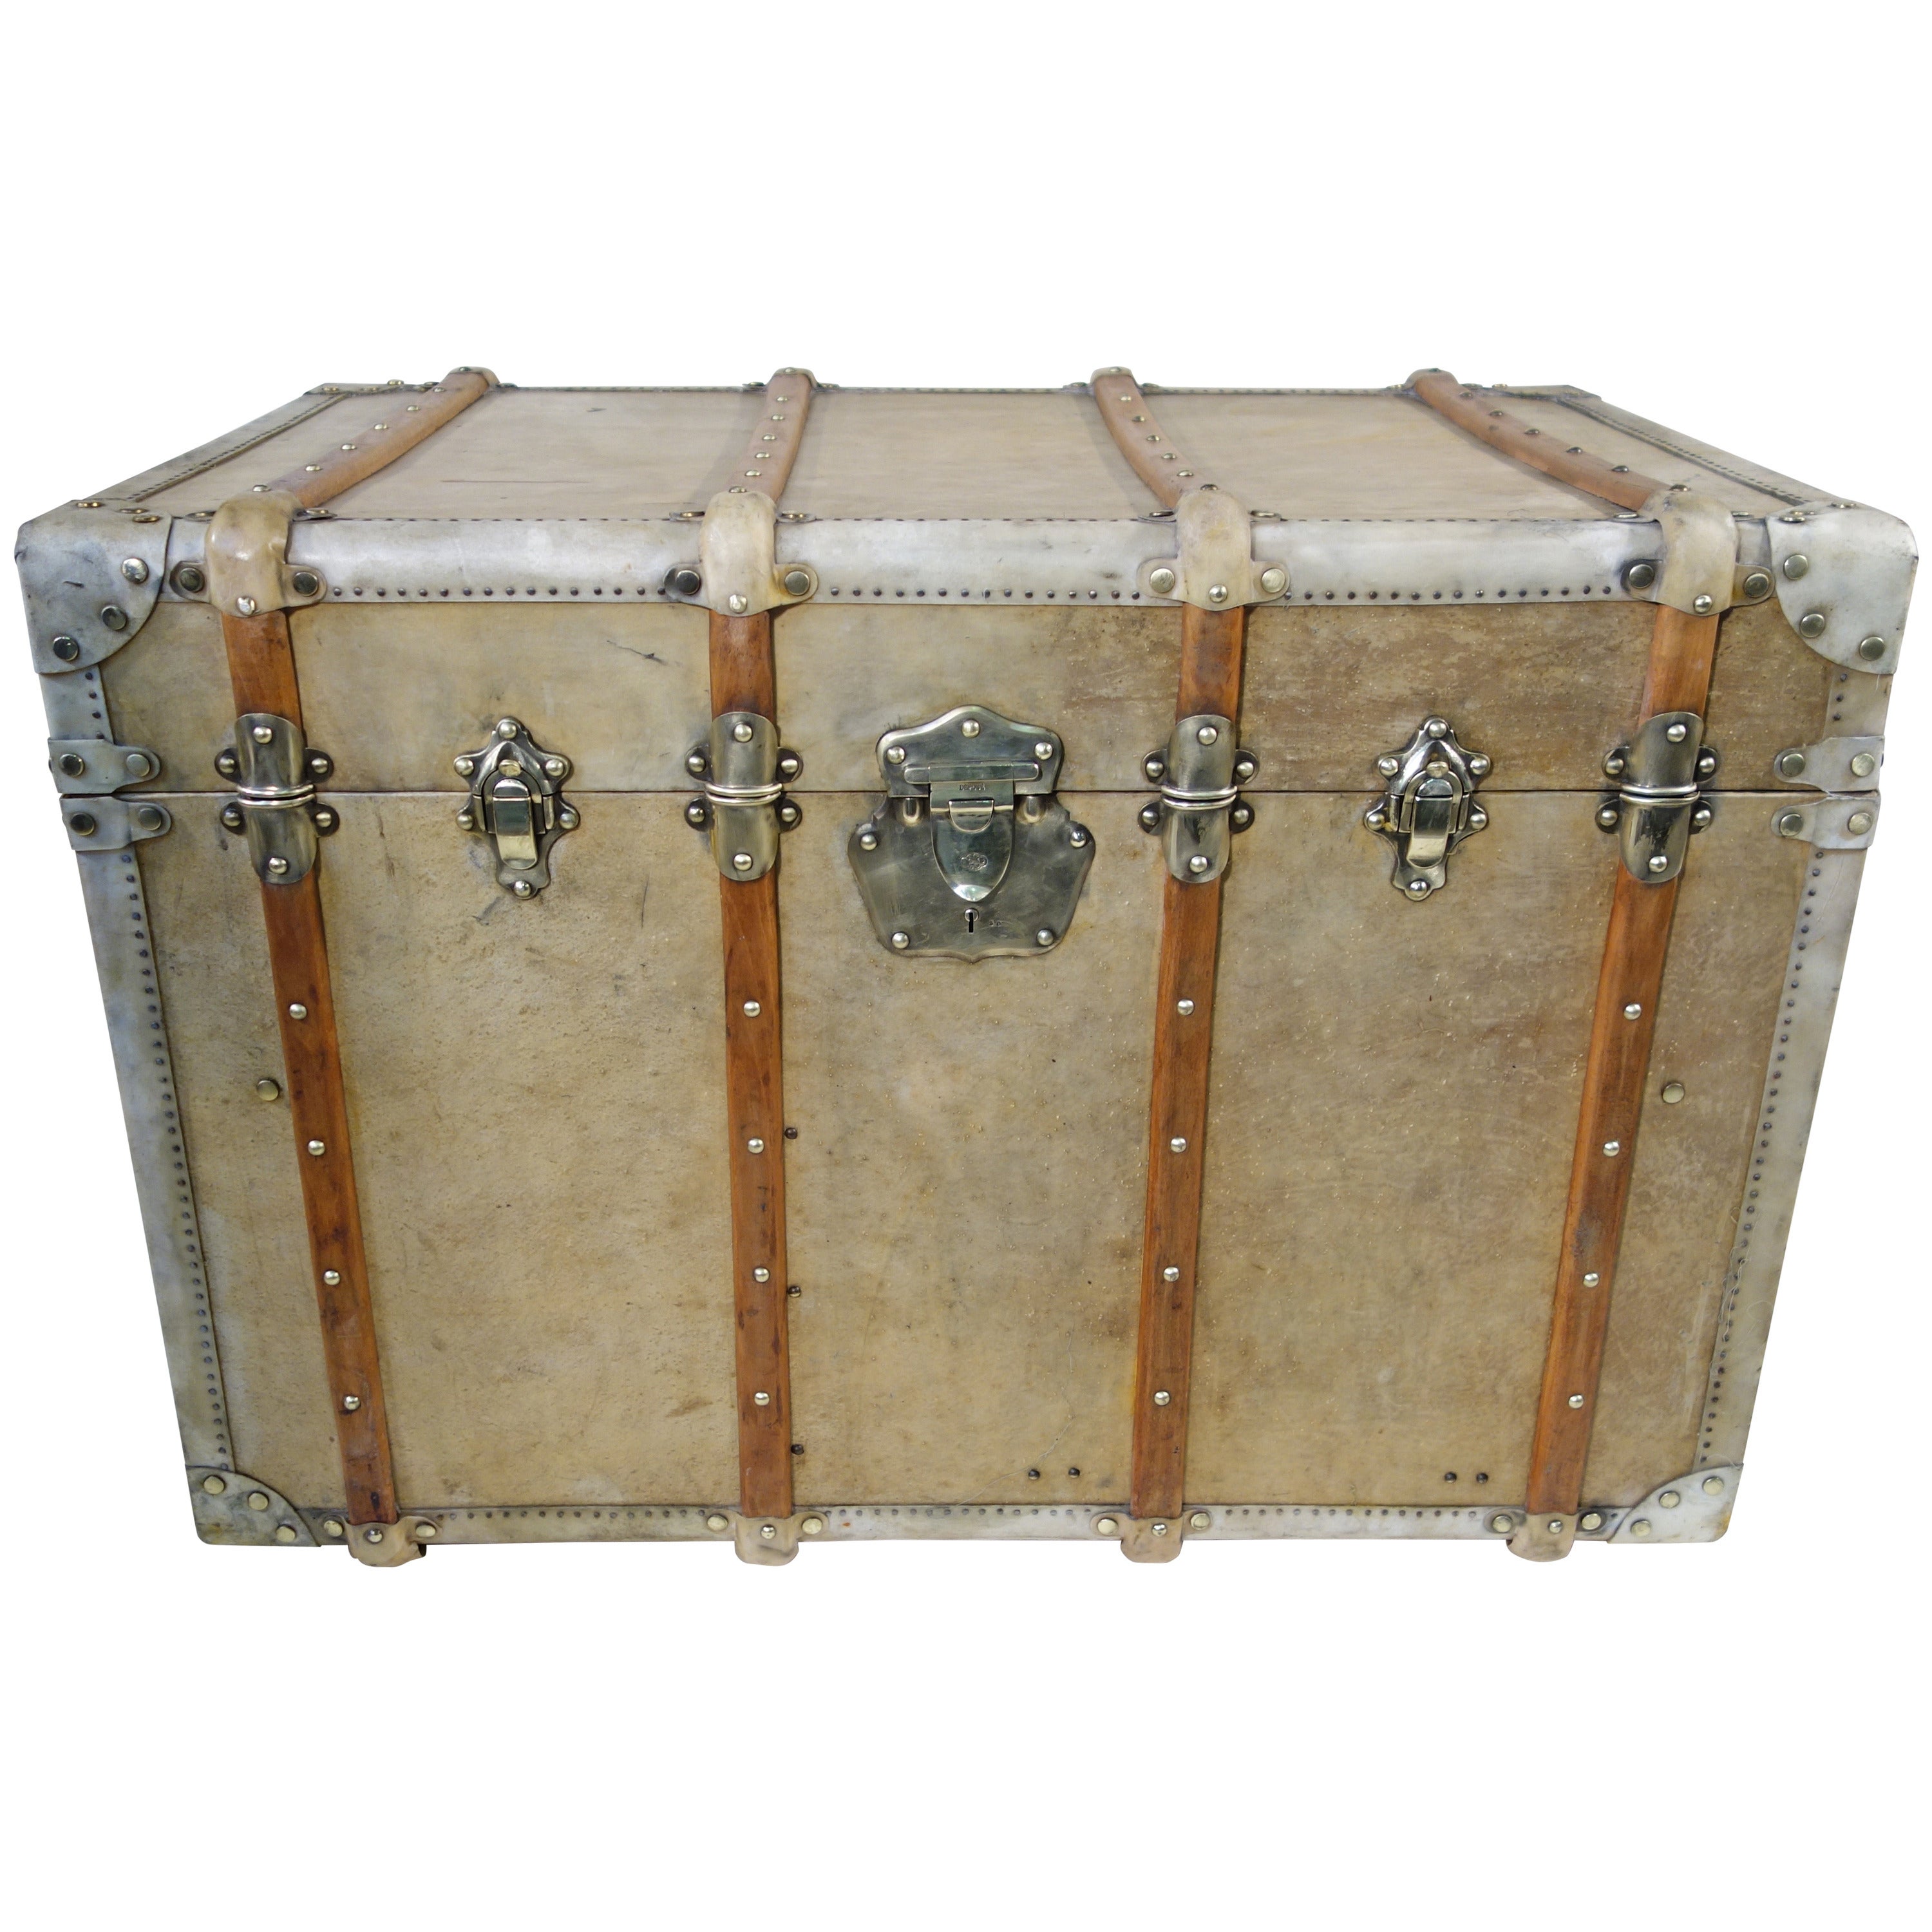 1920s Vellum Steamer Trunk or Malle Courrier Parchemin For Sale